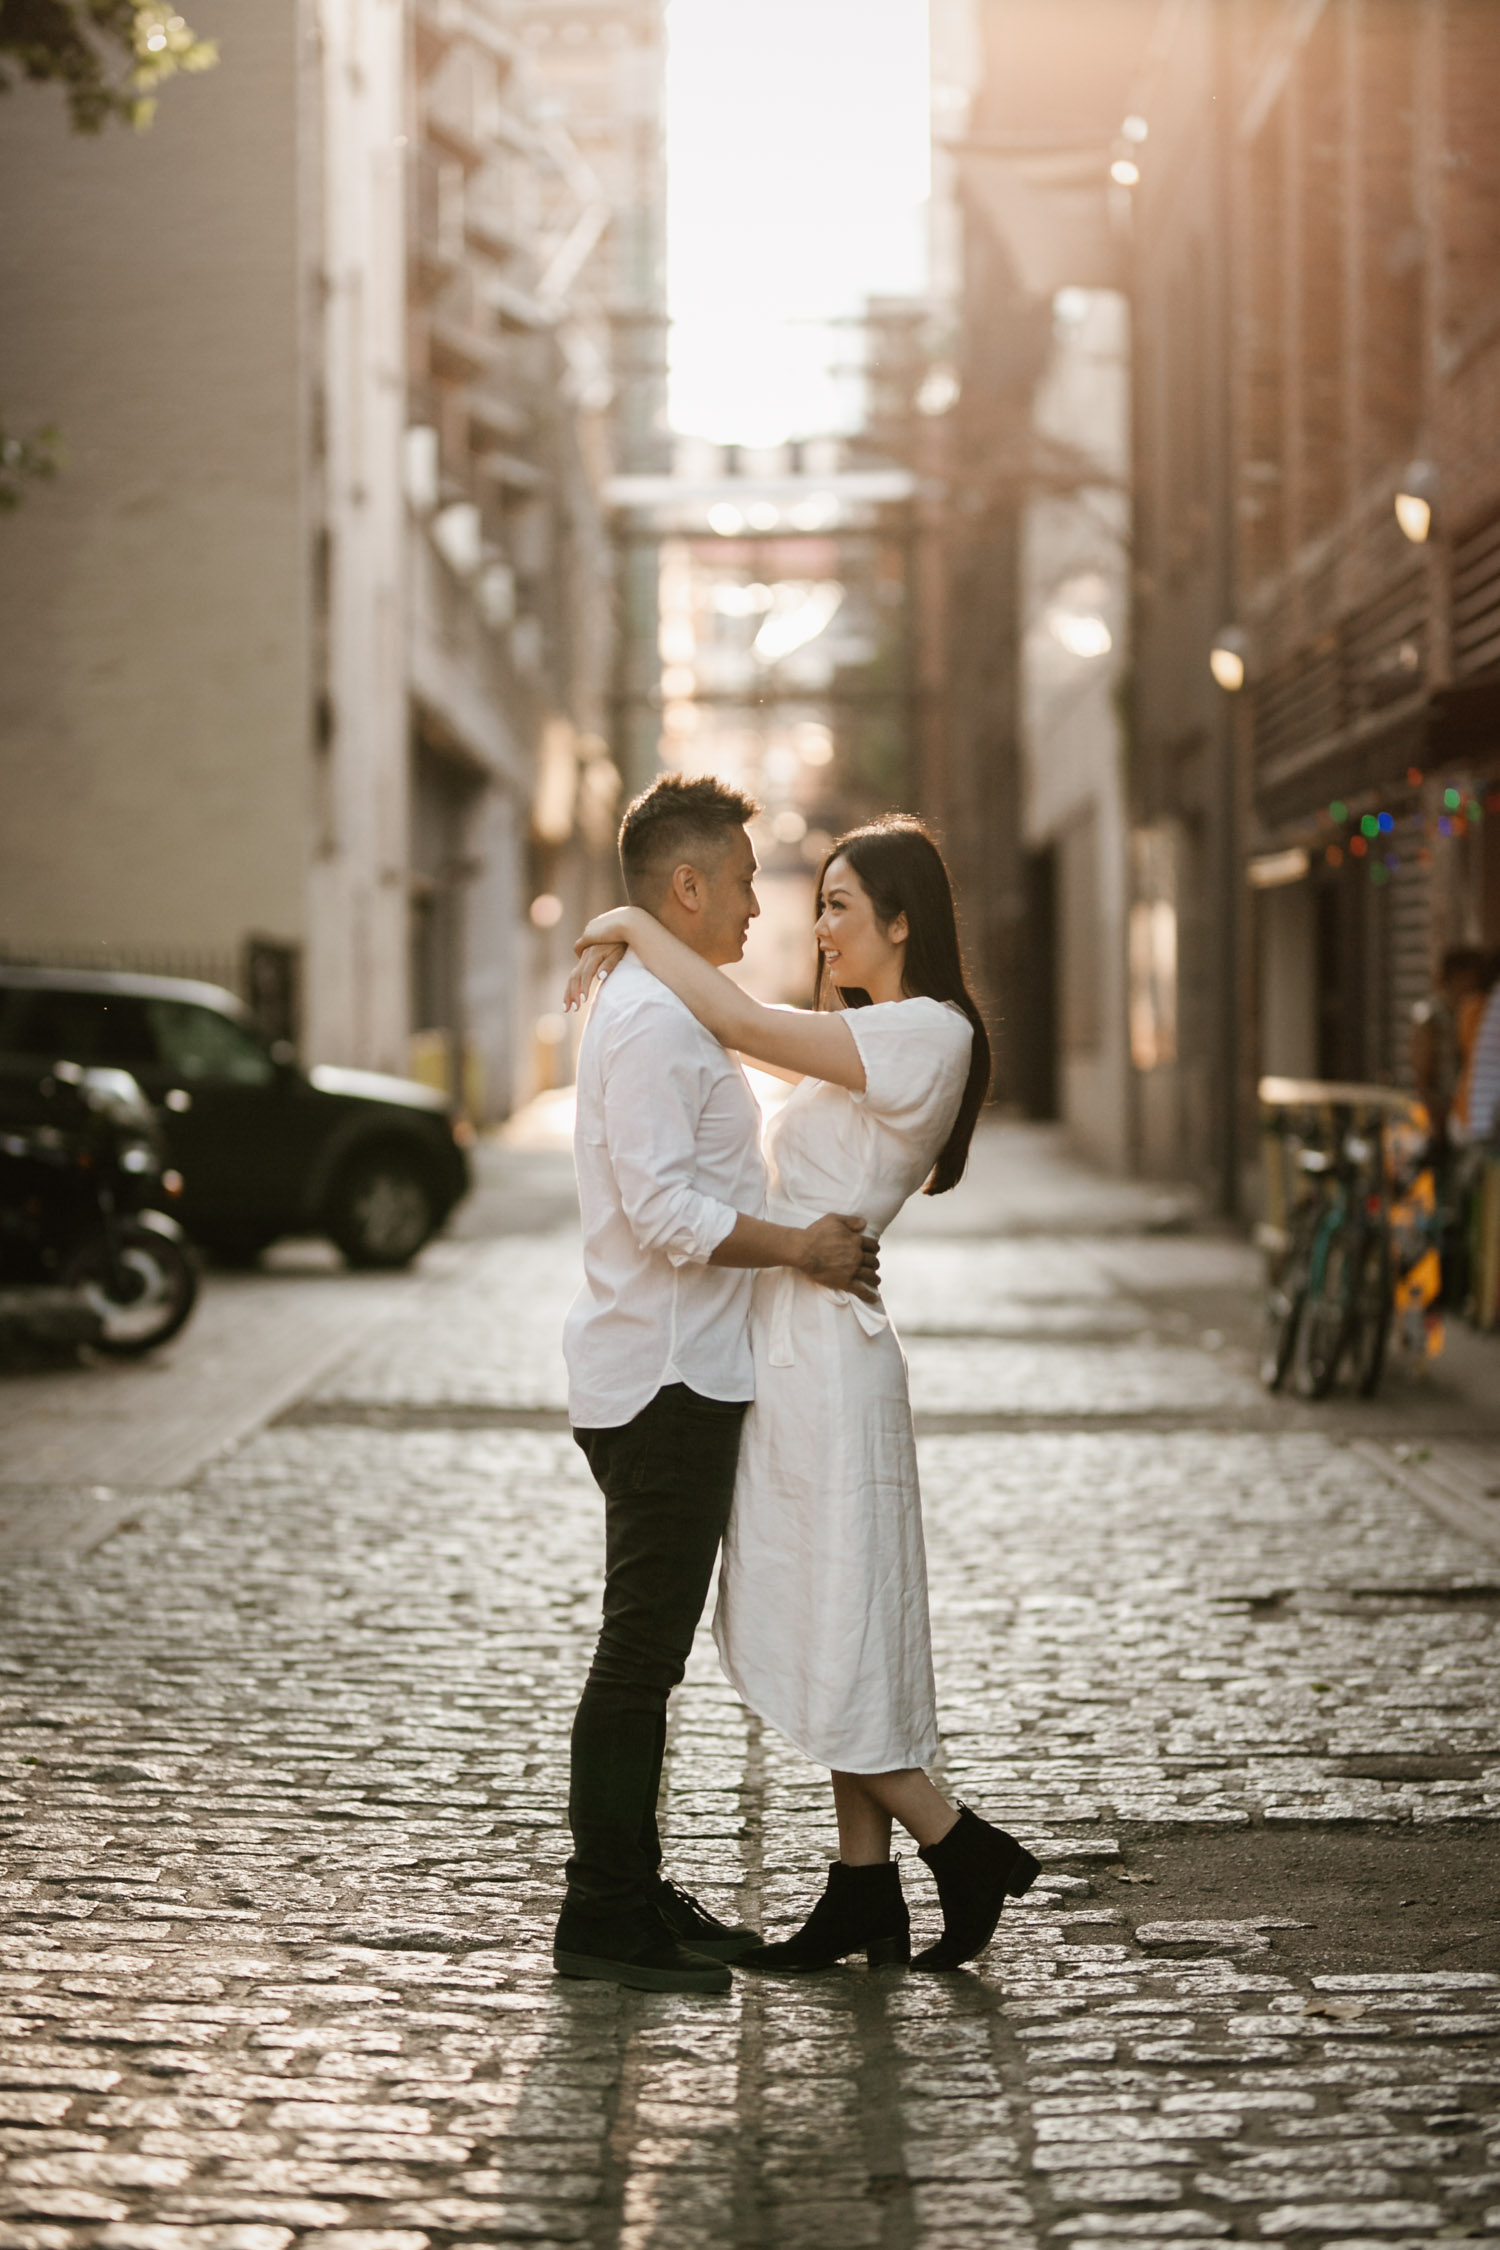 gastown engagement photography during golden hour in the summer located in vancouver bc canada